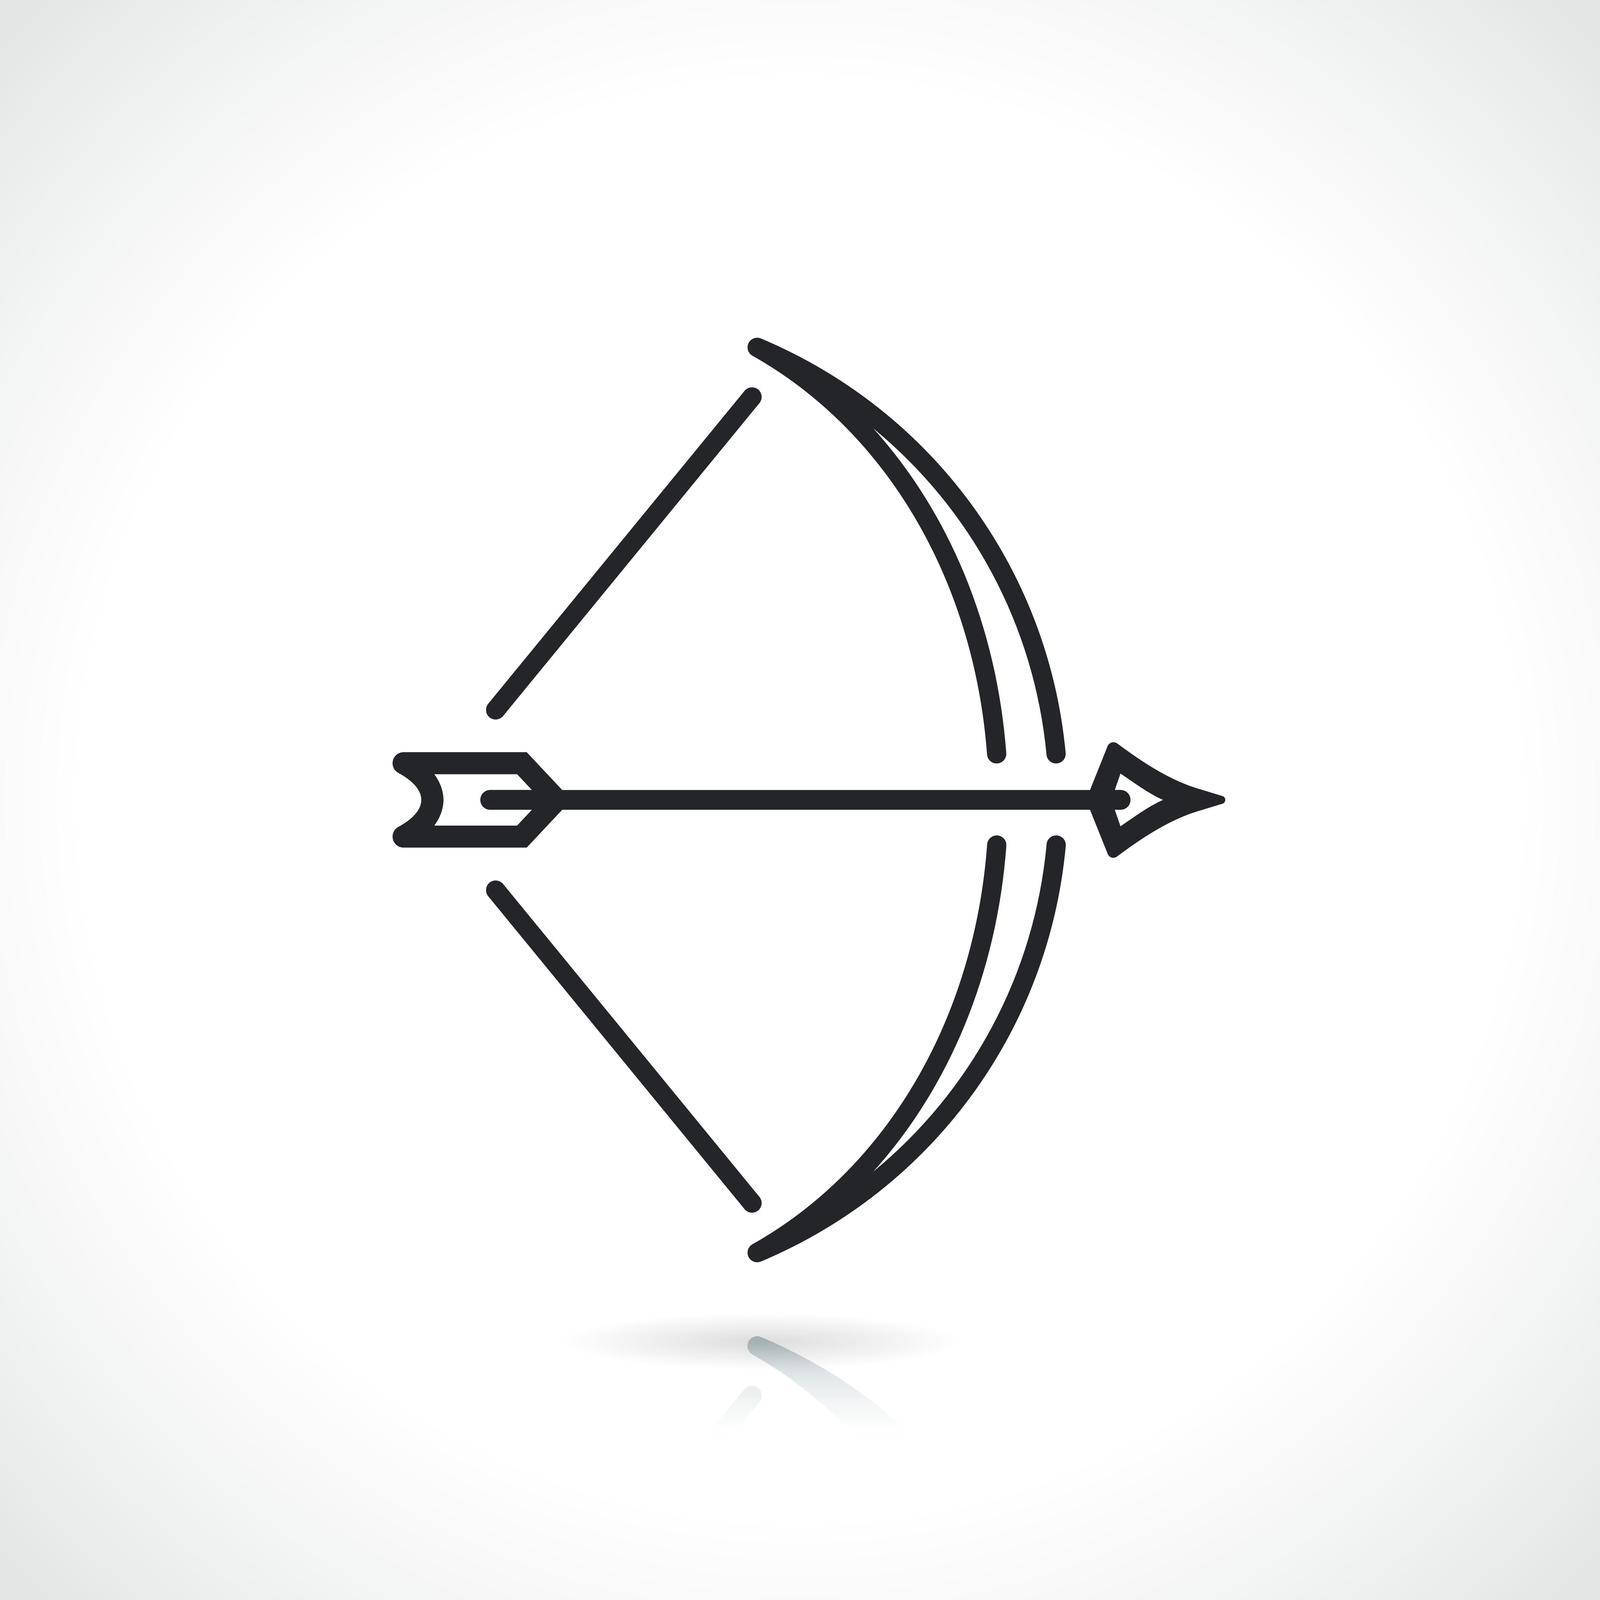 bow and arrow line icon by Francois_Poirier